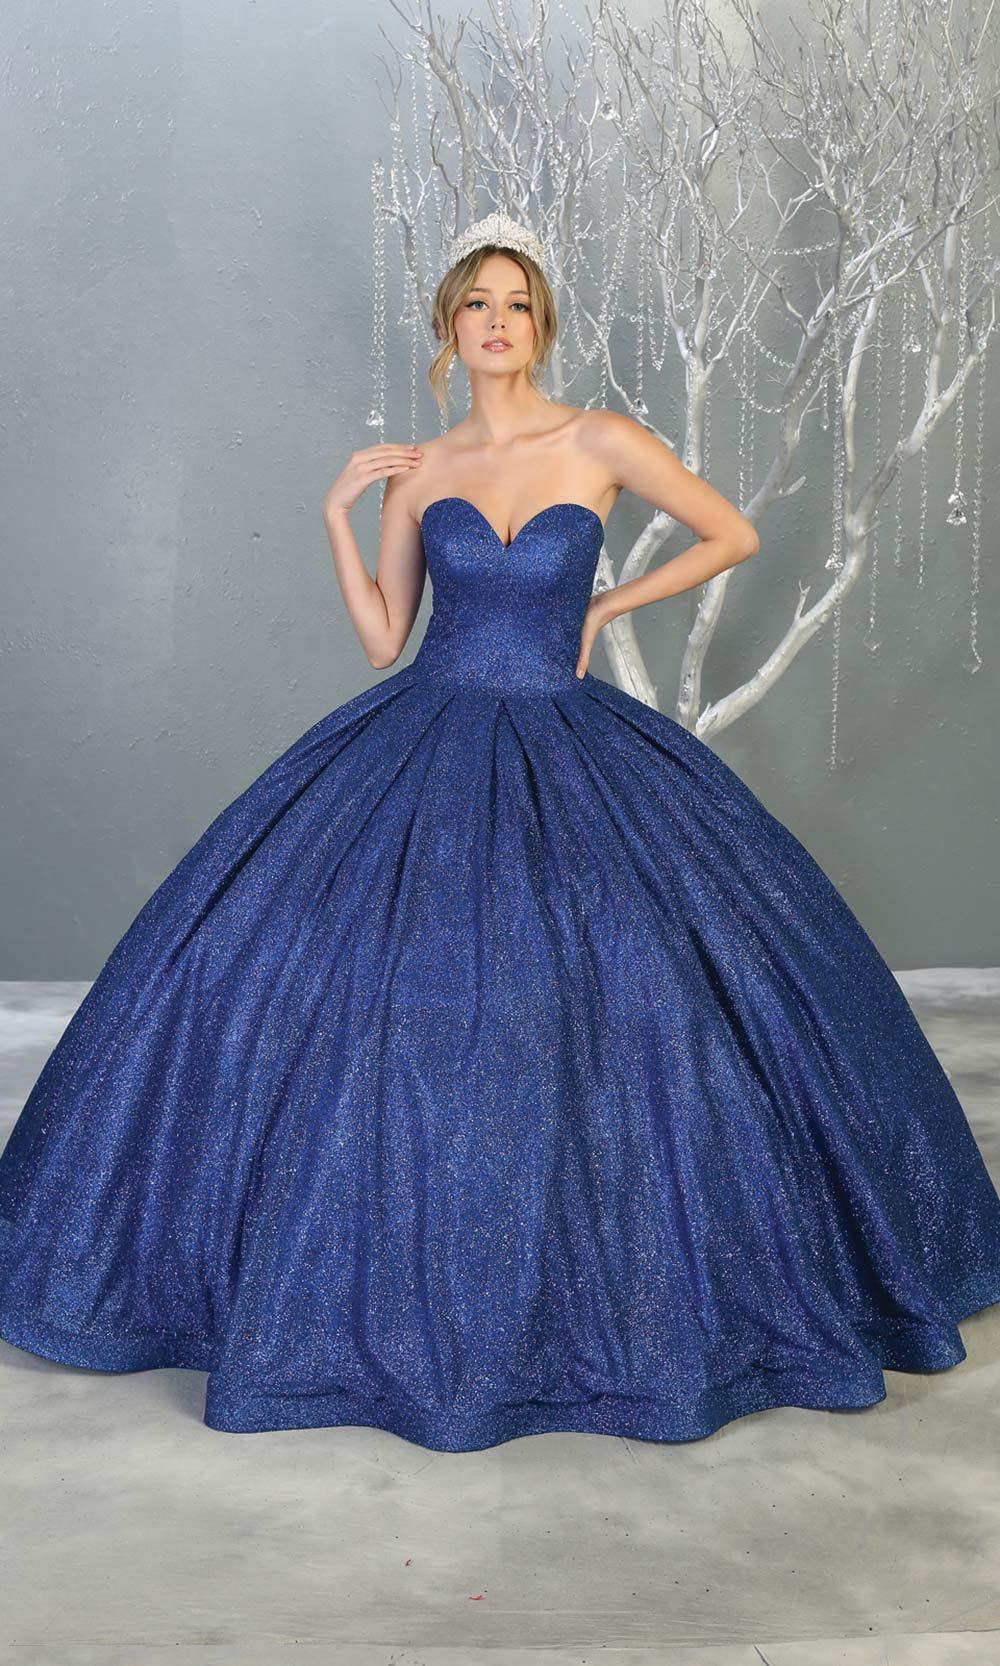 Mayqueen LK138 royal blue quinceanera metallic shiny ballgown. This strapless blue ball gown is perfect for engagement dress, wedding reception, indowestern party gown, sweet 16, debut, sweet 15, sweet 18. Plus sizes available for ballgowns